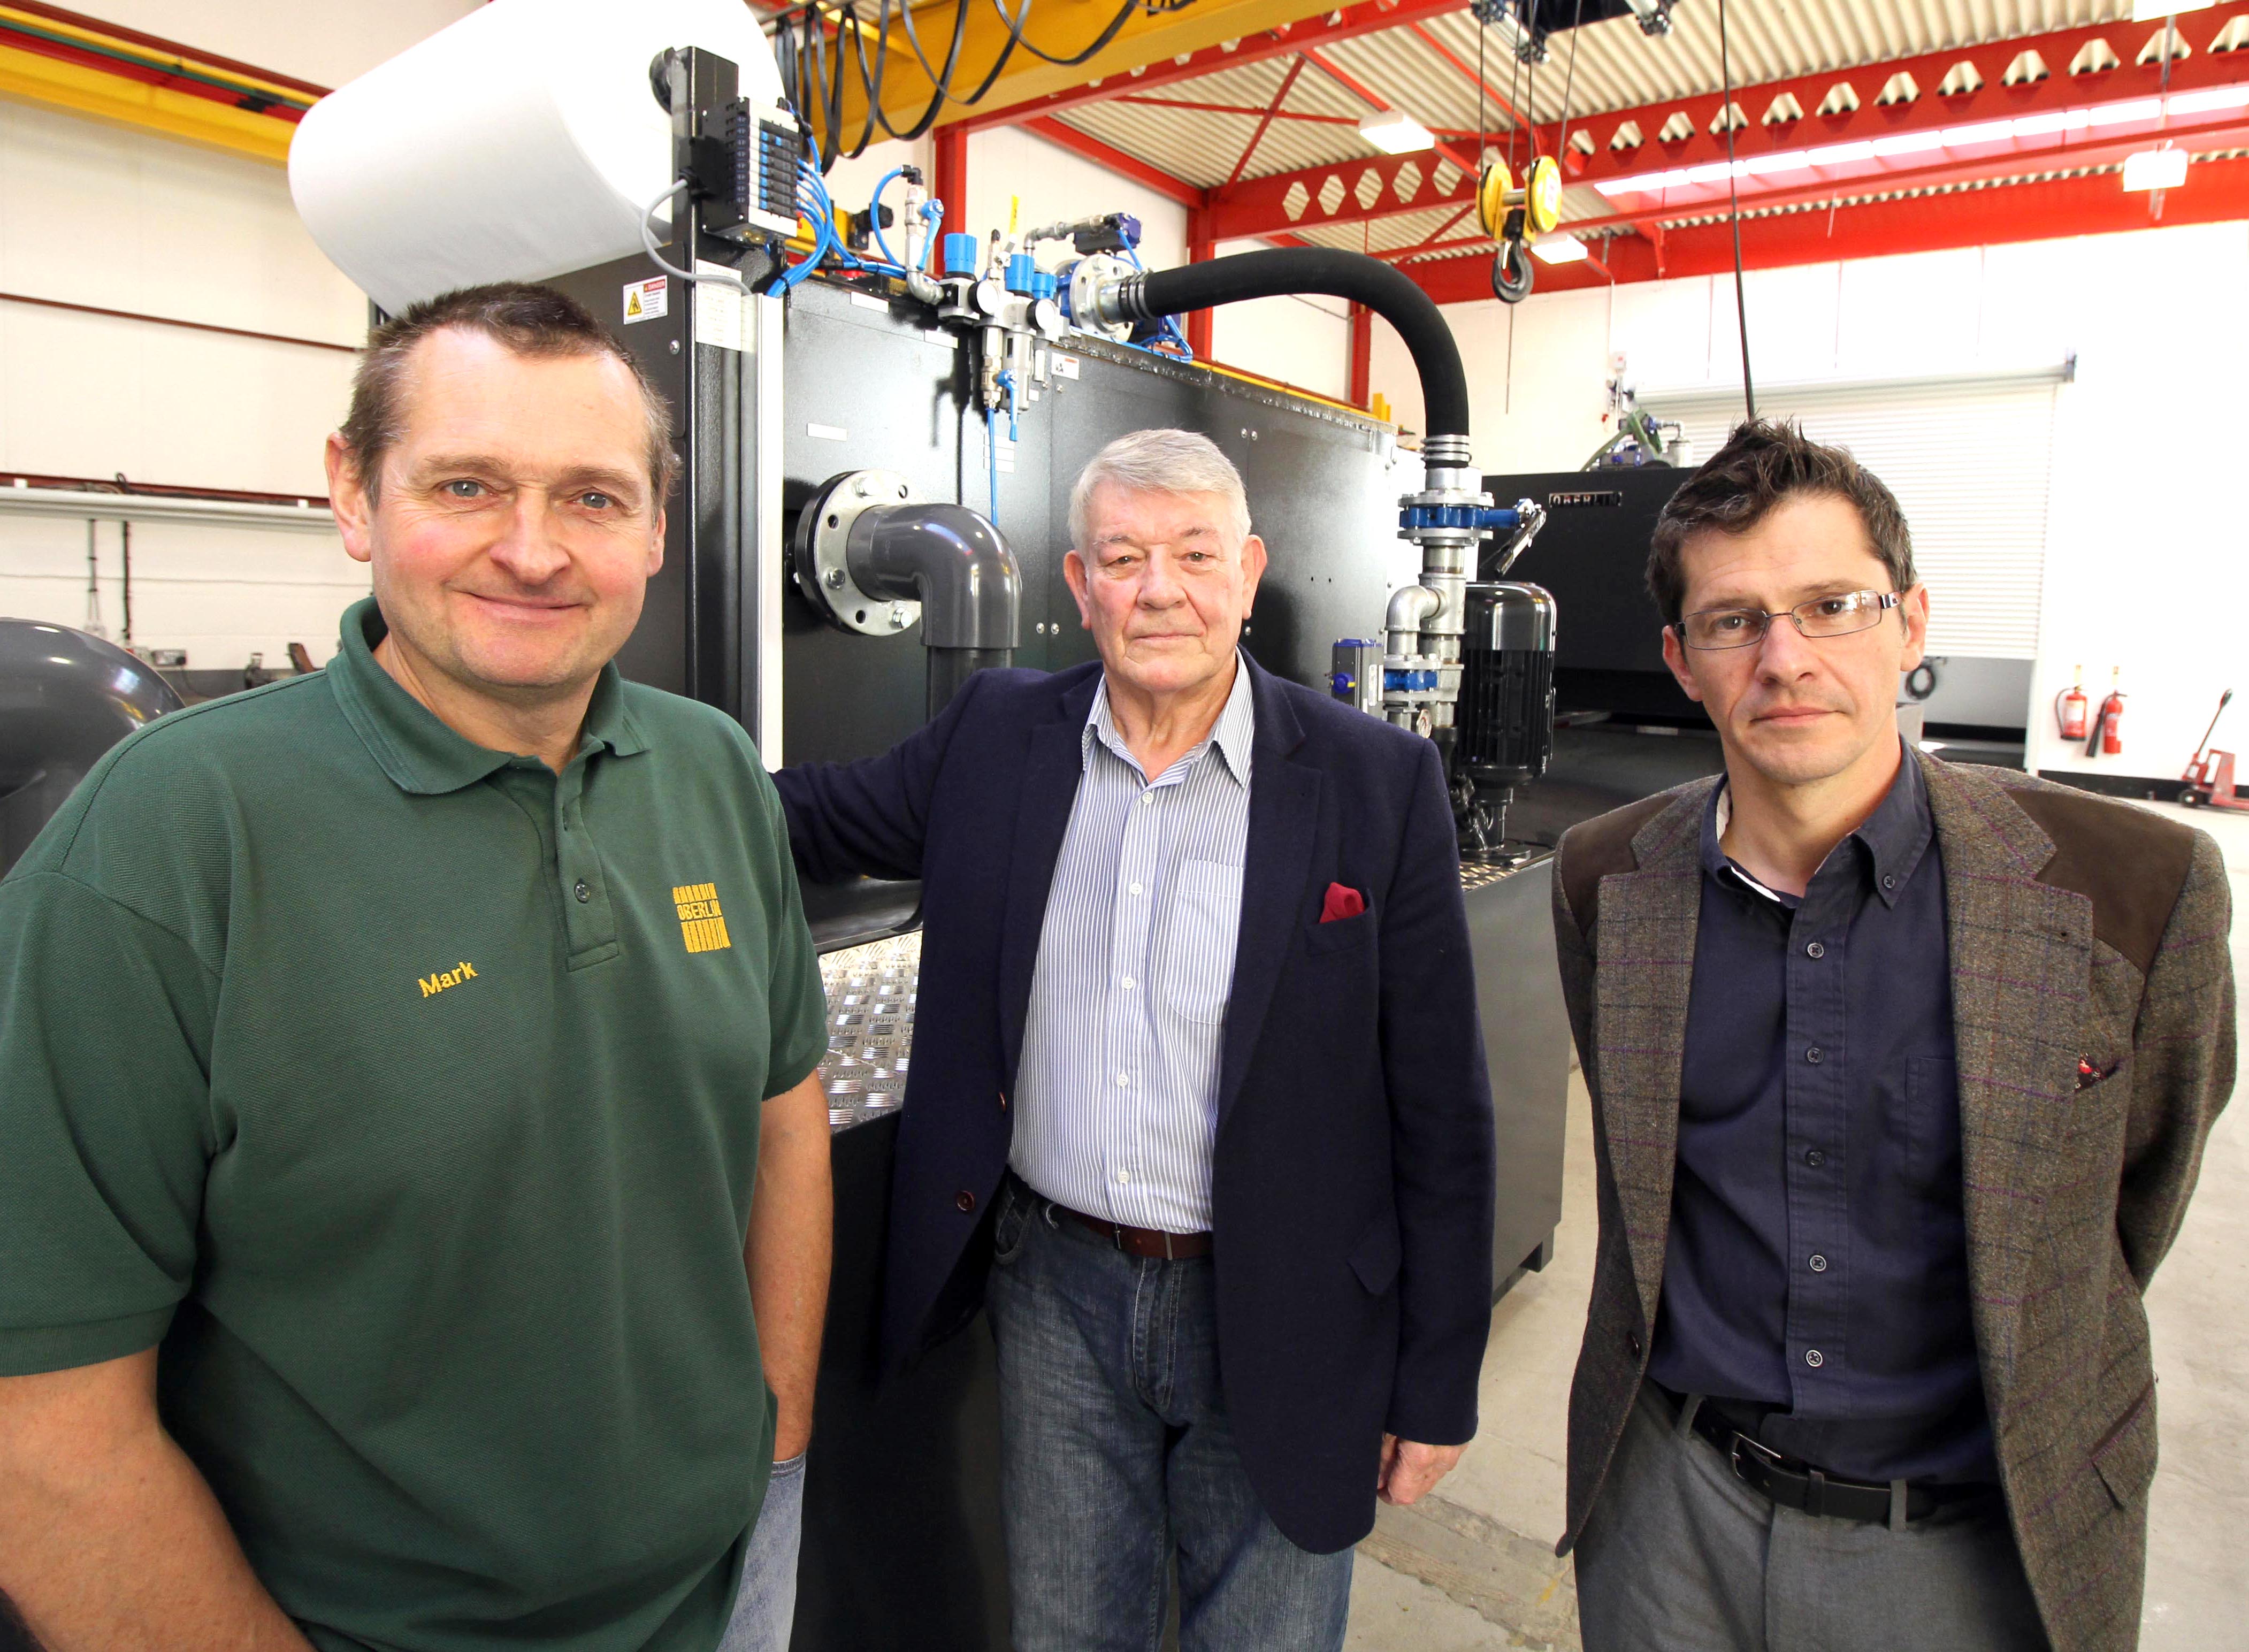 Aycliffe Company Moves to Larger Premises